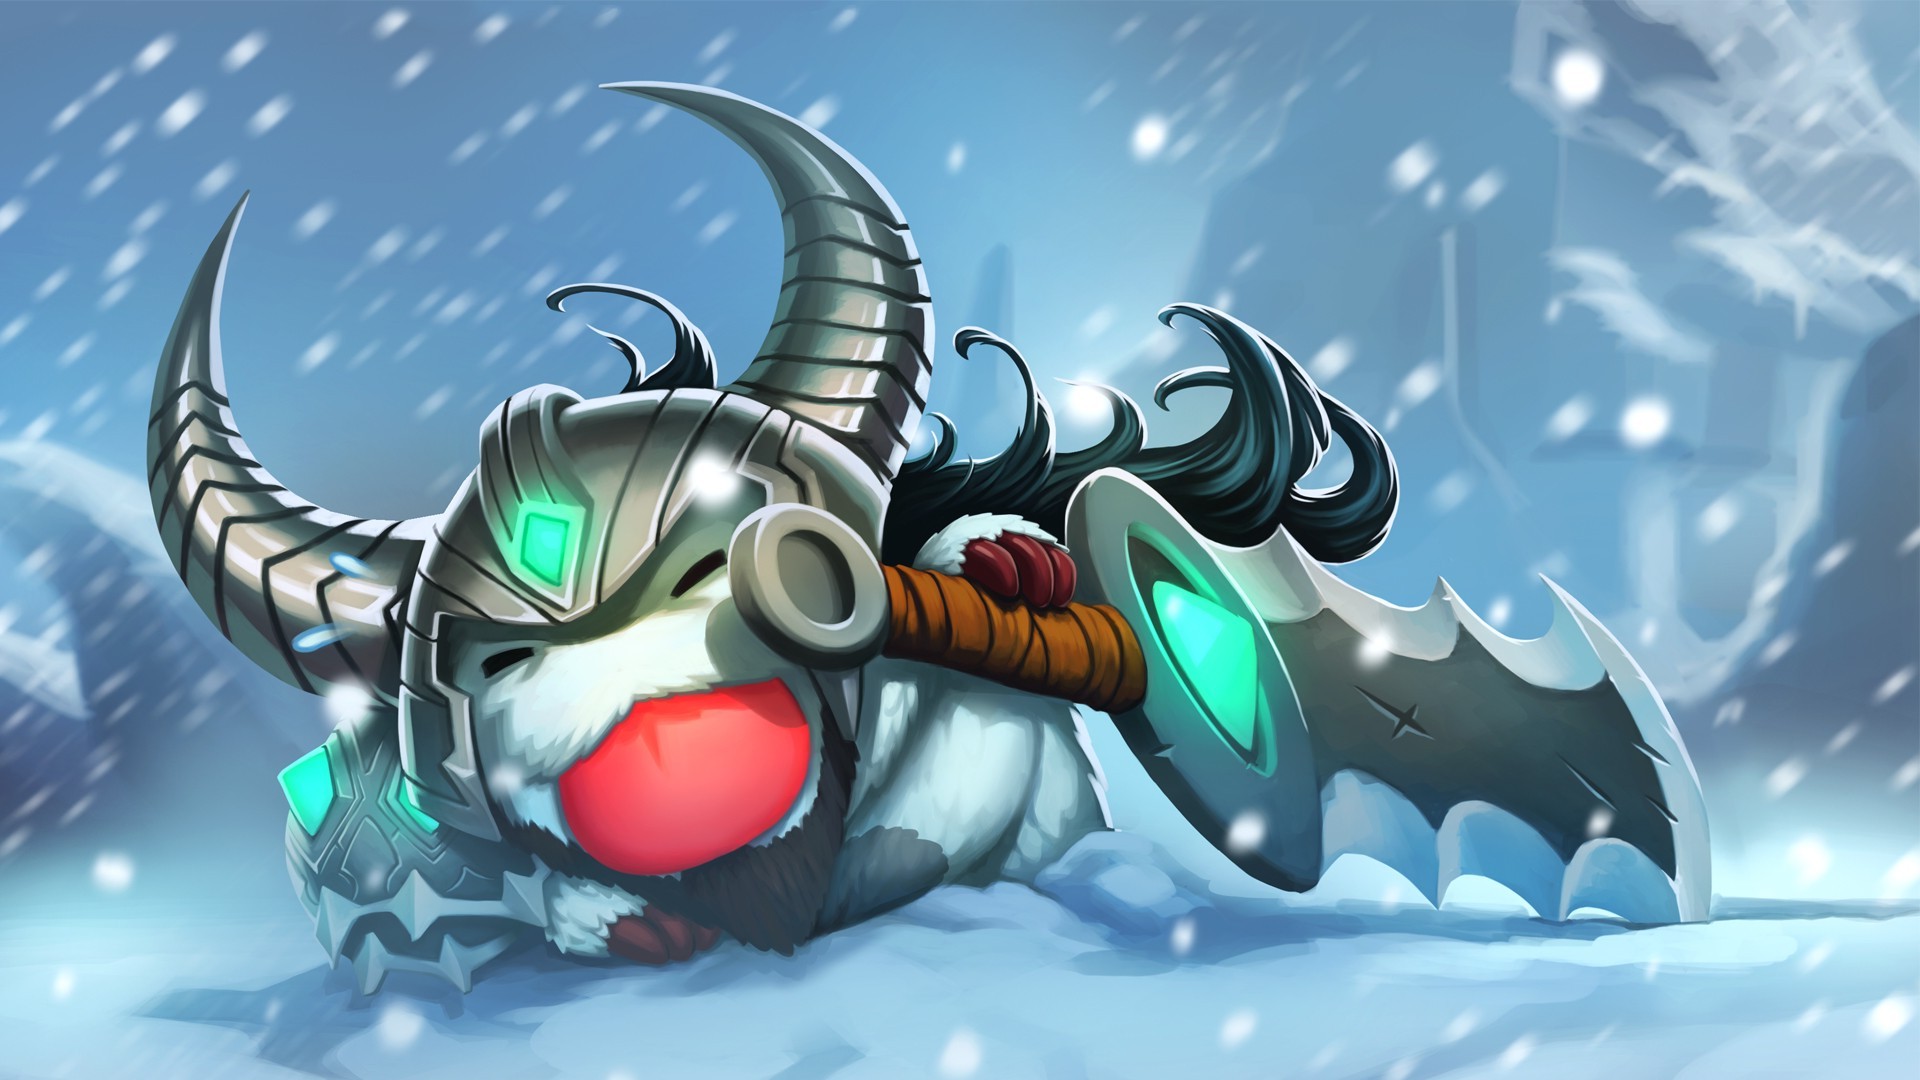 266719 League_of_Legends Poro Tryndamere